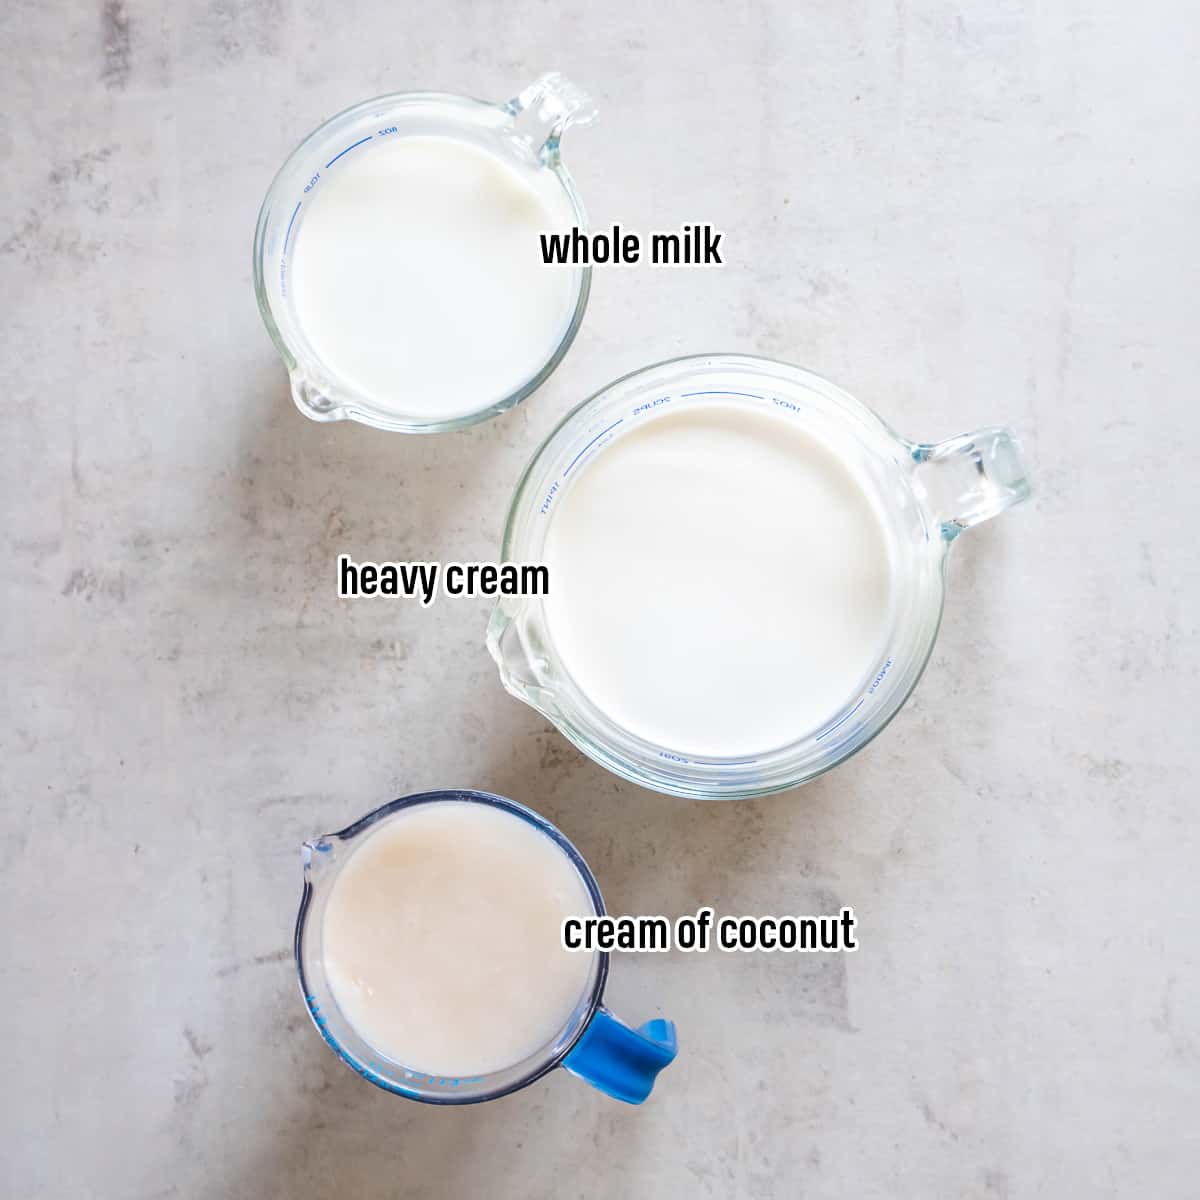 Cream of coconut, whole milk, and heavy cream in glass measuring cups with text.